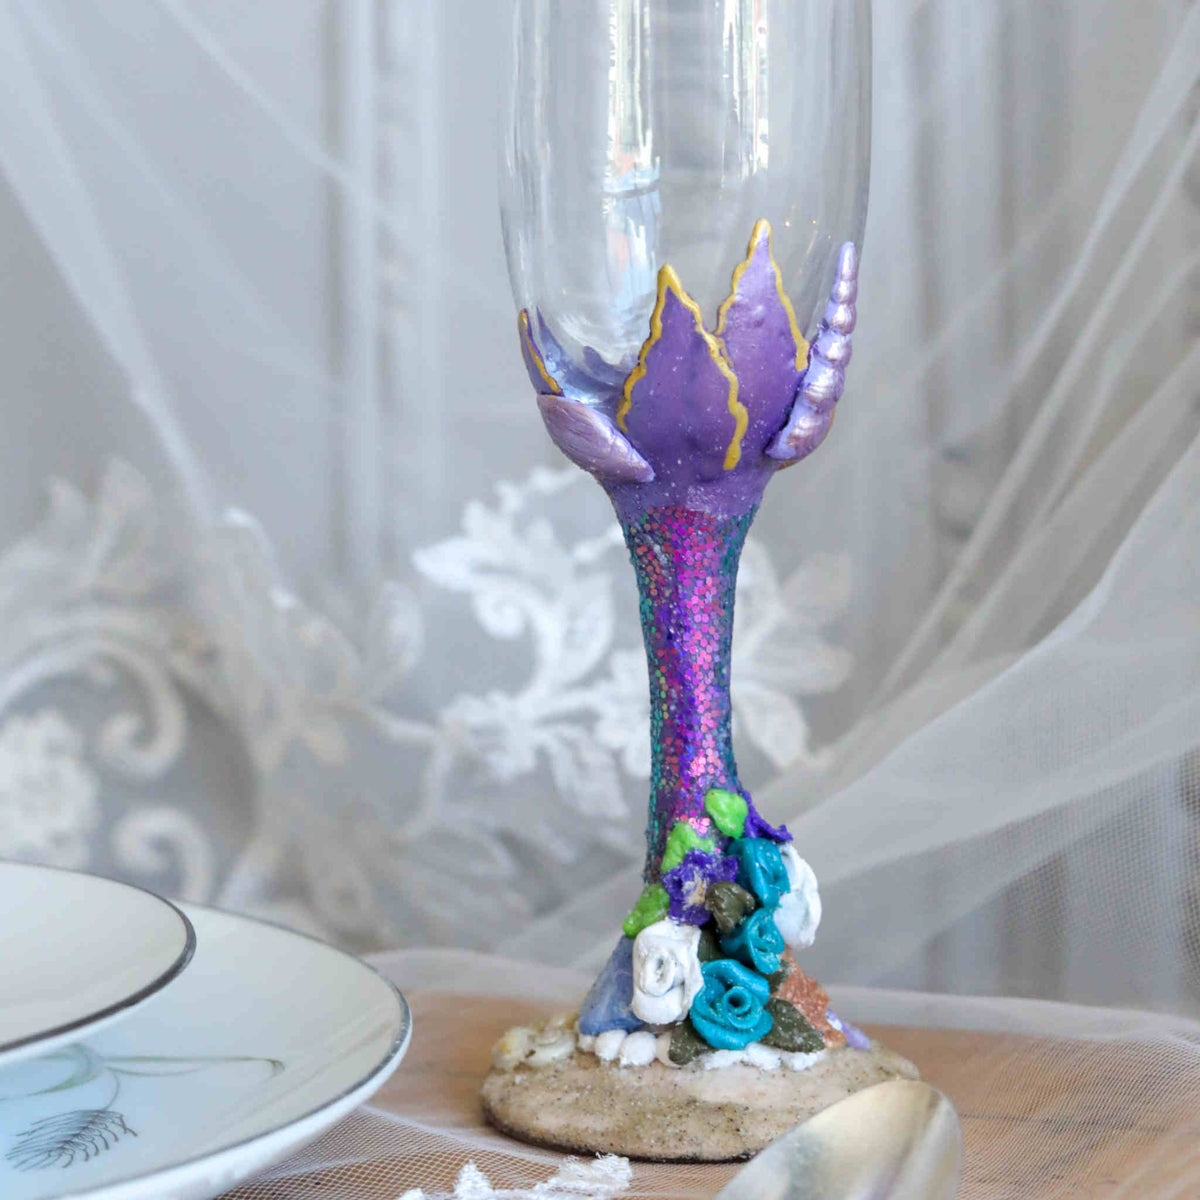 Enjoy the sea and sand while you toast to each other on your special wedding day or wedding anniversary. Each flute is hand-scuplted and painted with purple, teal, and white tiny seashells and flowers using polymer clay and sealed to last.